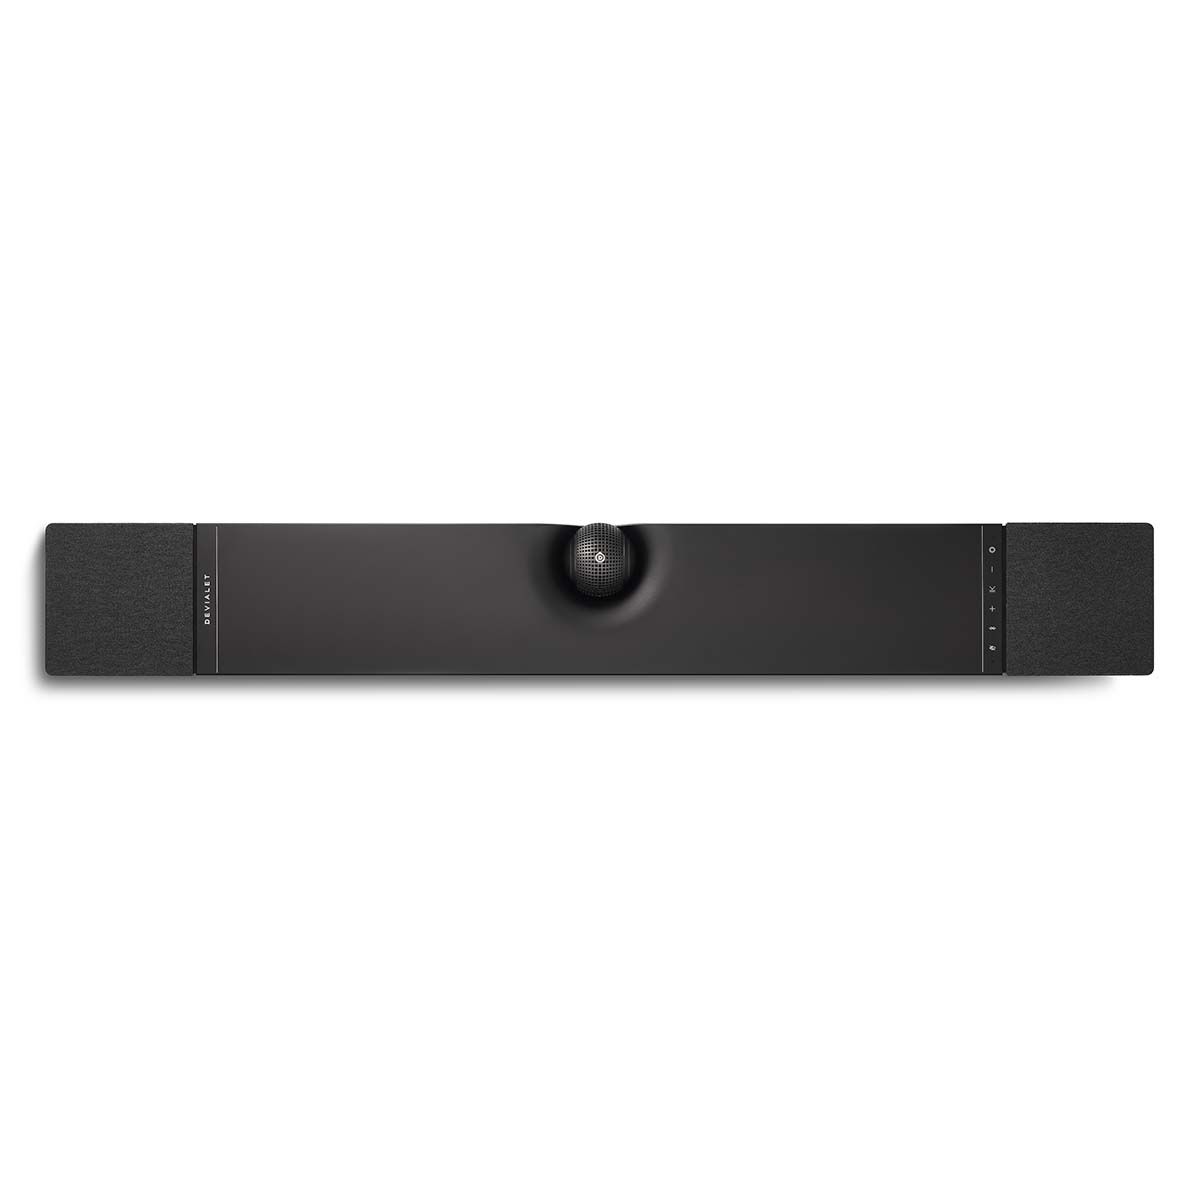 Devialet Dione Dolby Atmos Soundbar, front view in vertical configuration